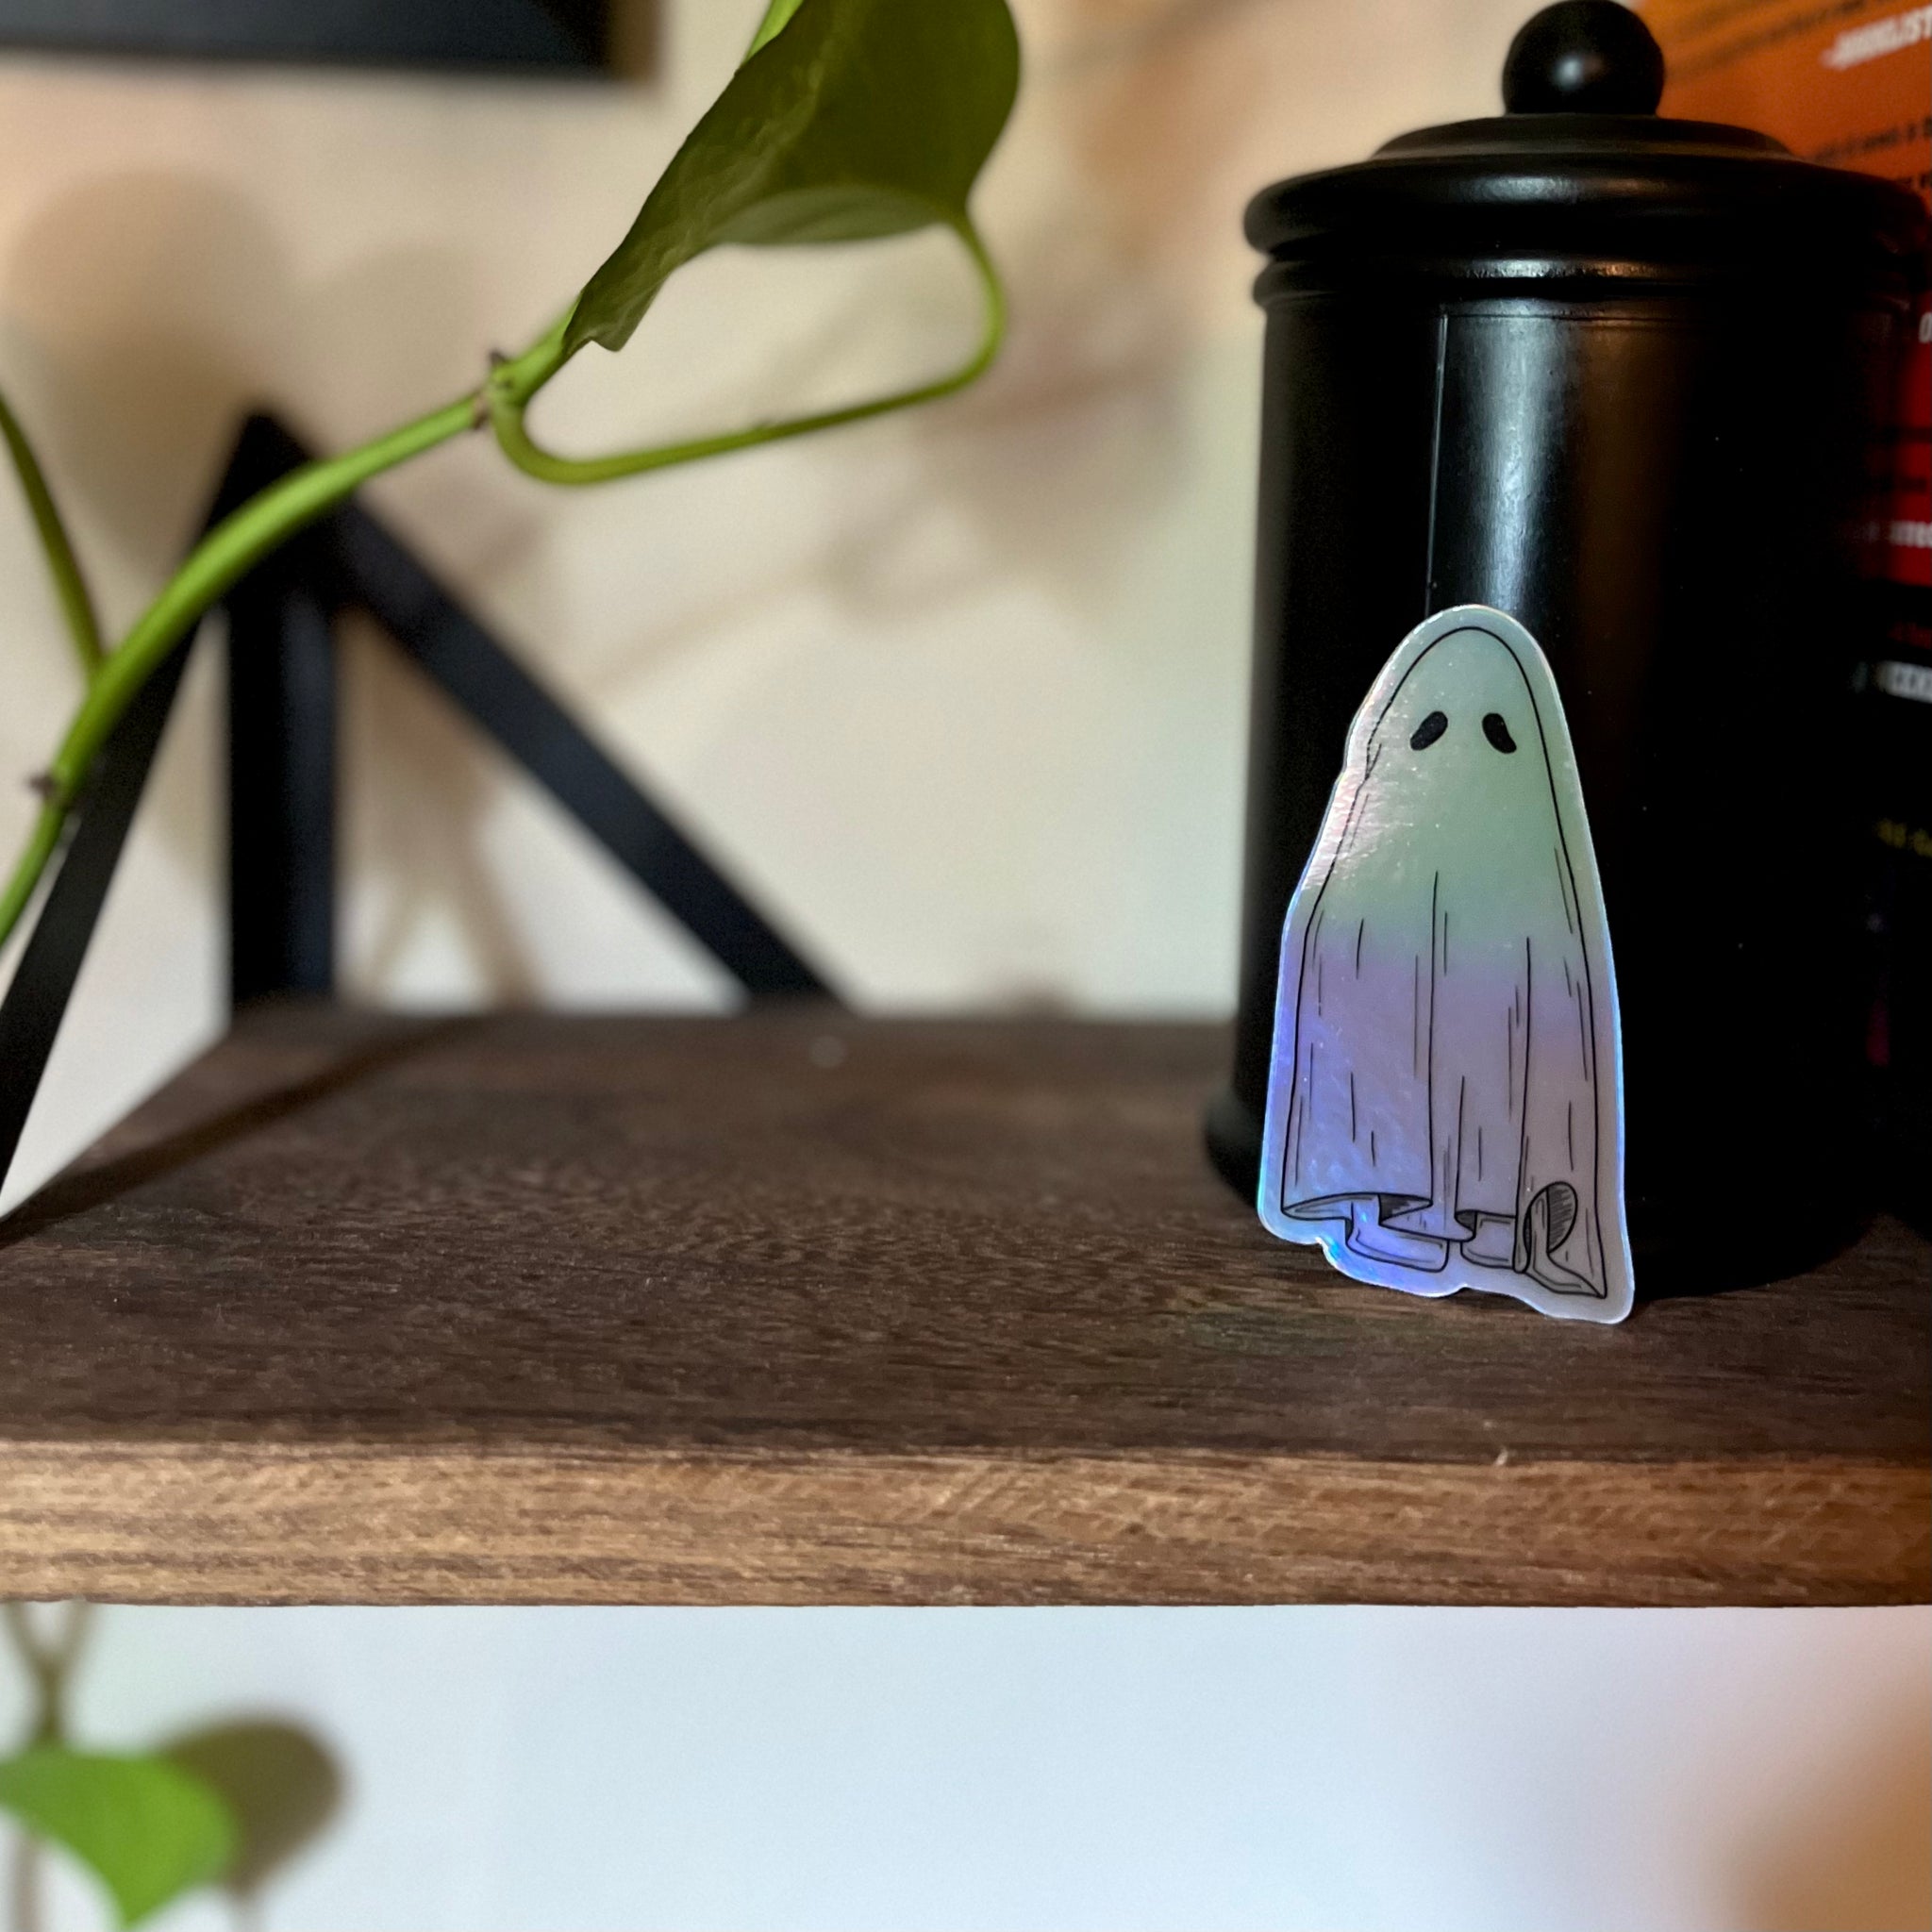 Holographic Ghost Sticker / Magnet